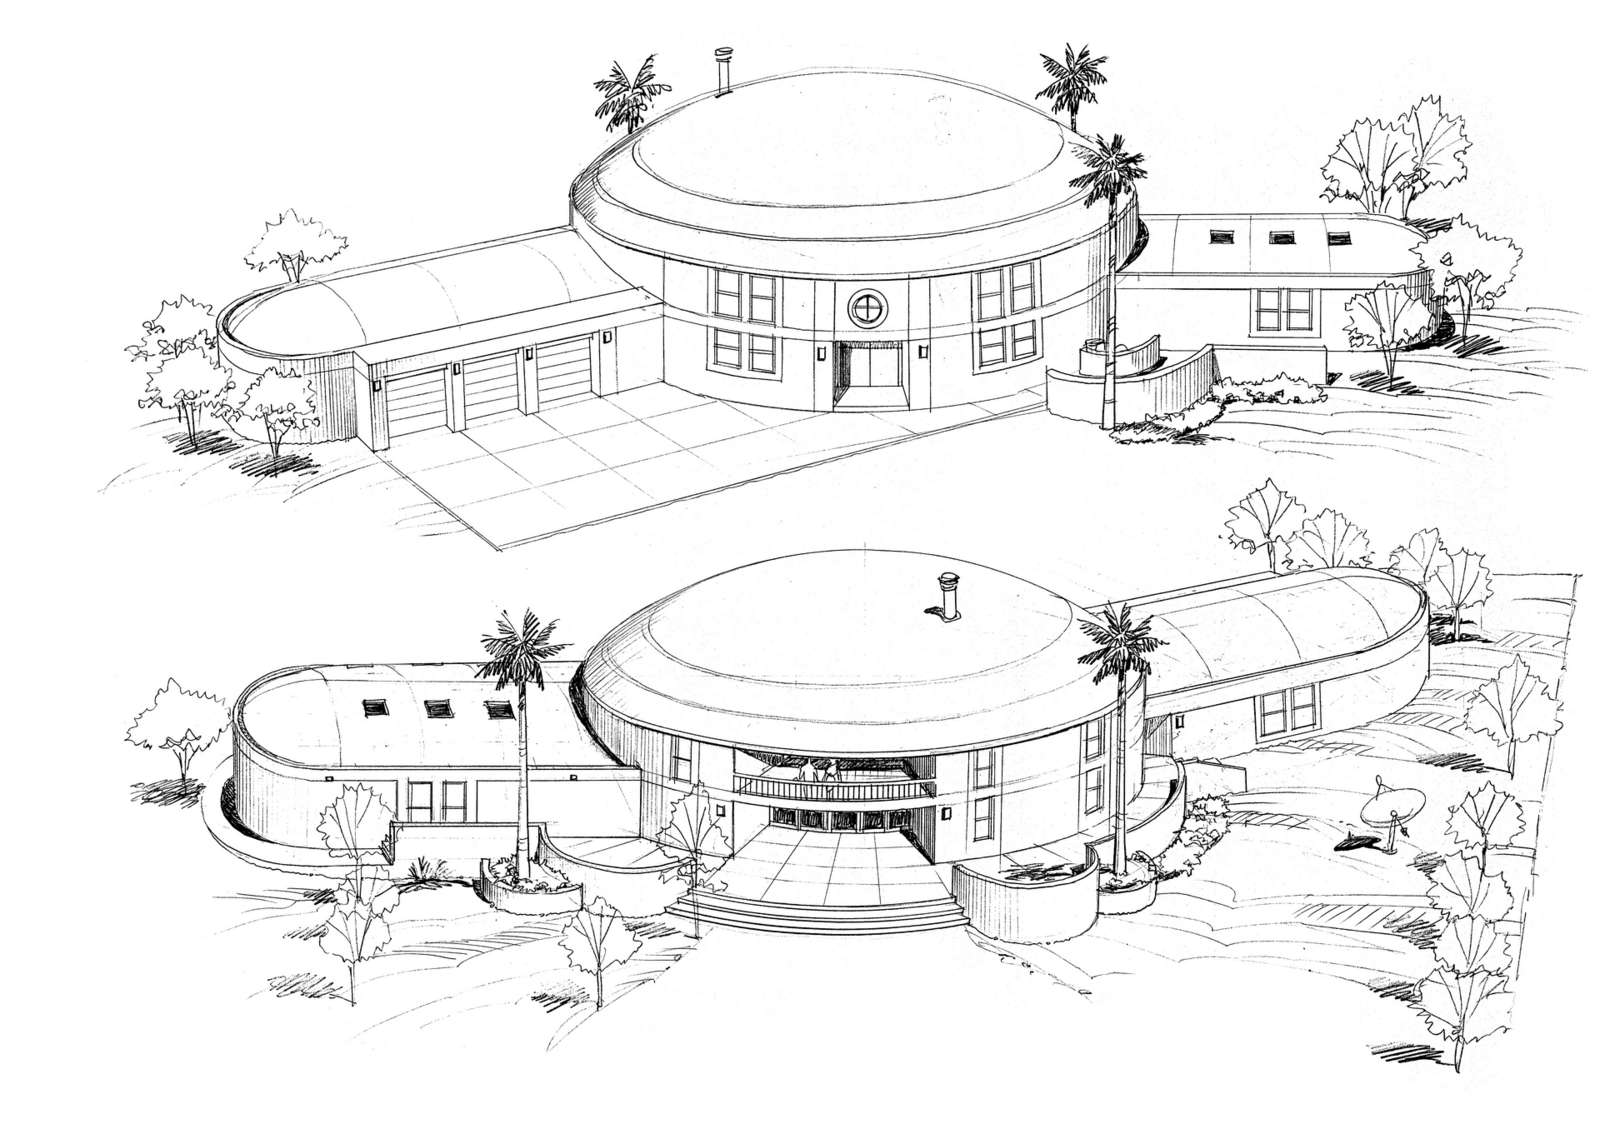 Front and rear elevations of proposed Monolithic Dome home.